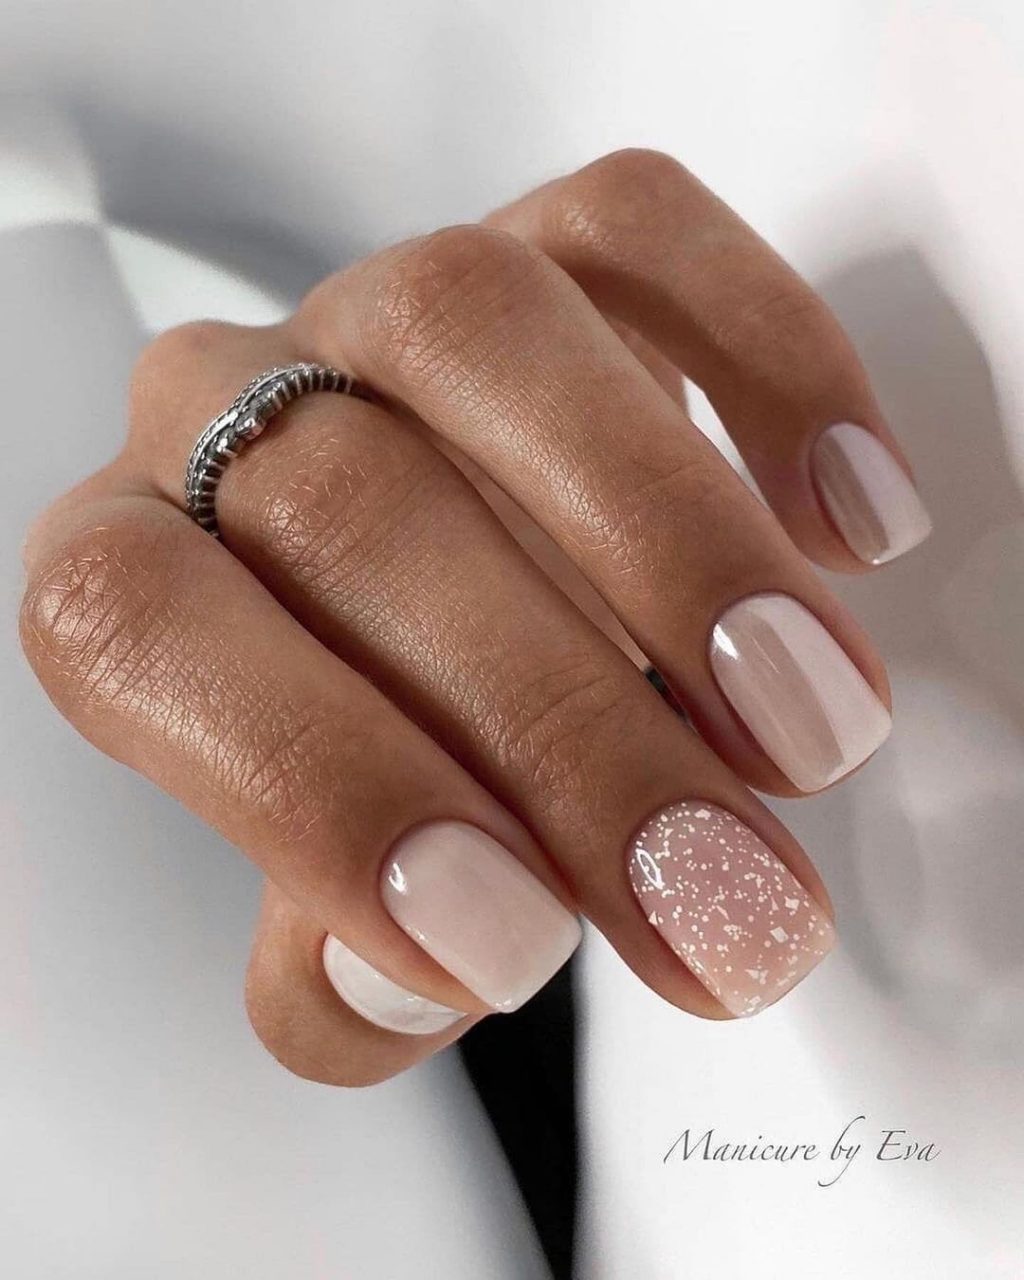 10 Classy Nail Designs That Look Awesome With Any Outfit  ShineSheets